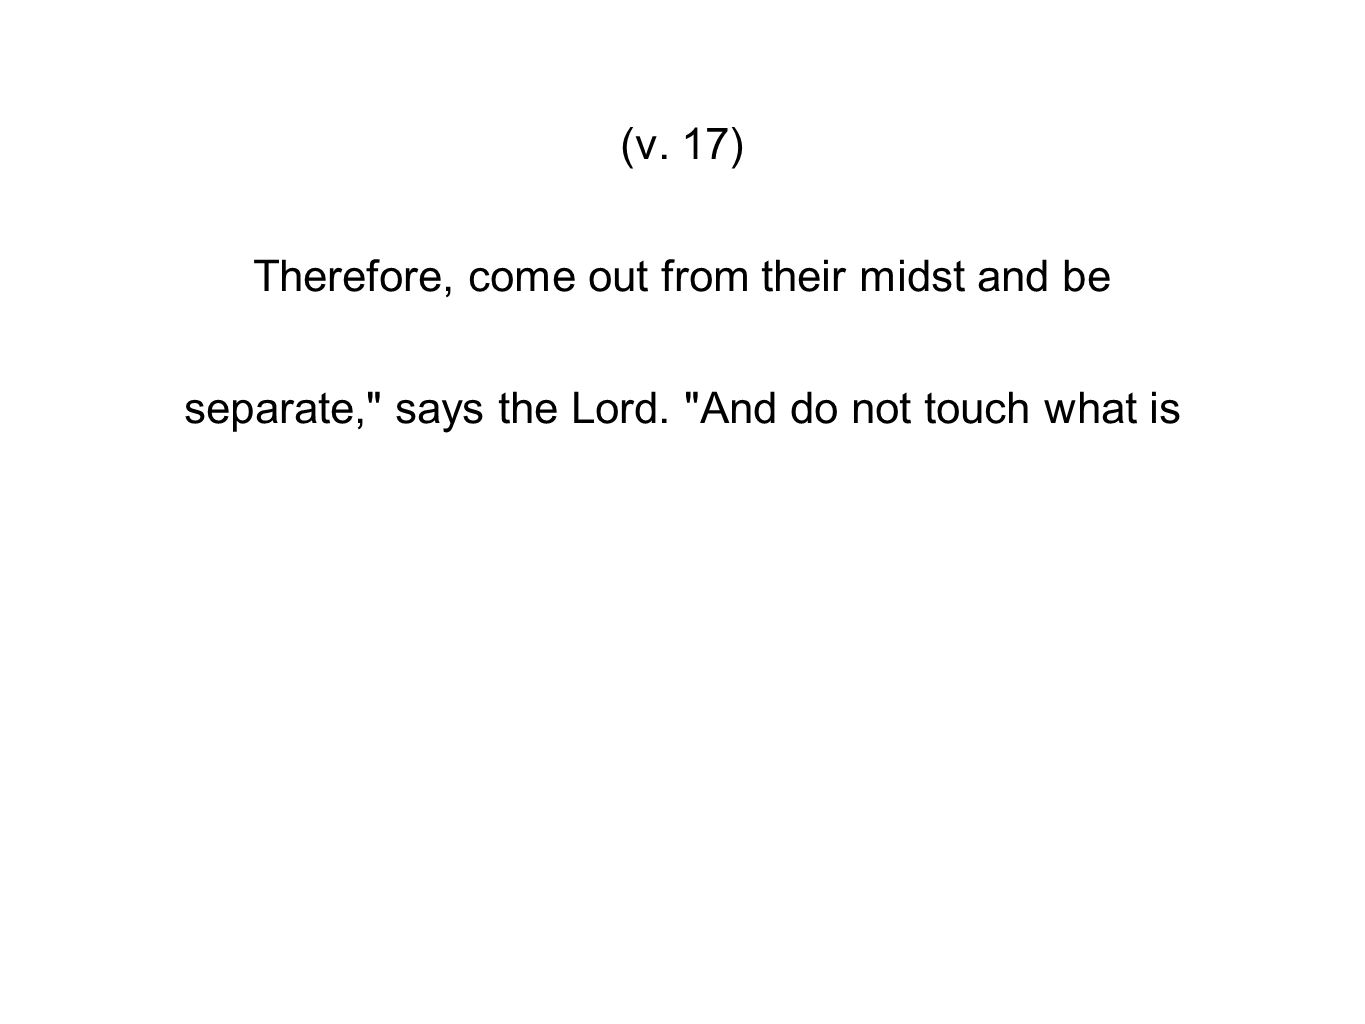 (v. 17) Therefore, come out from their midst and be separate, says the Lord.